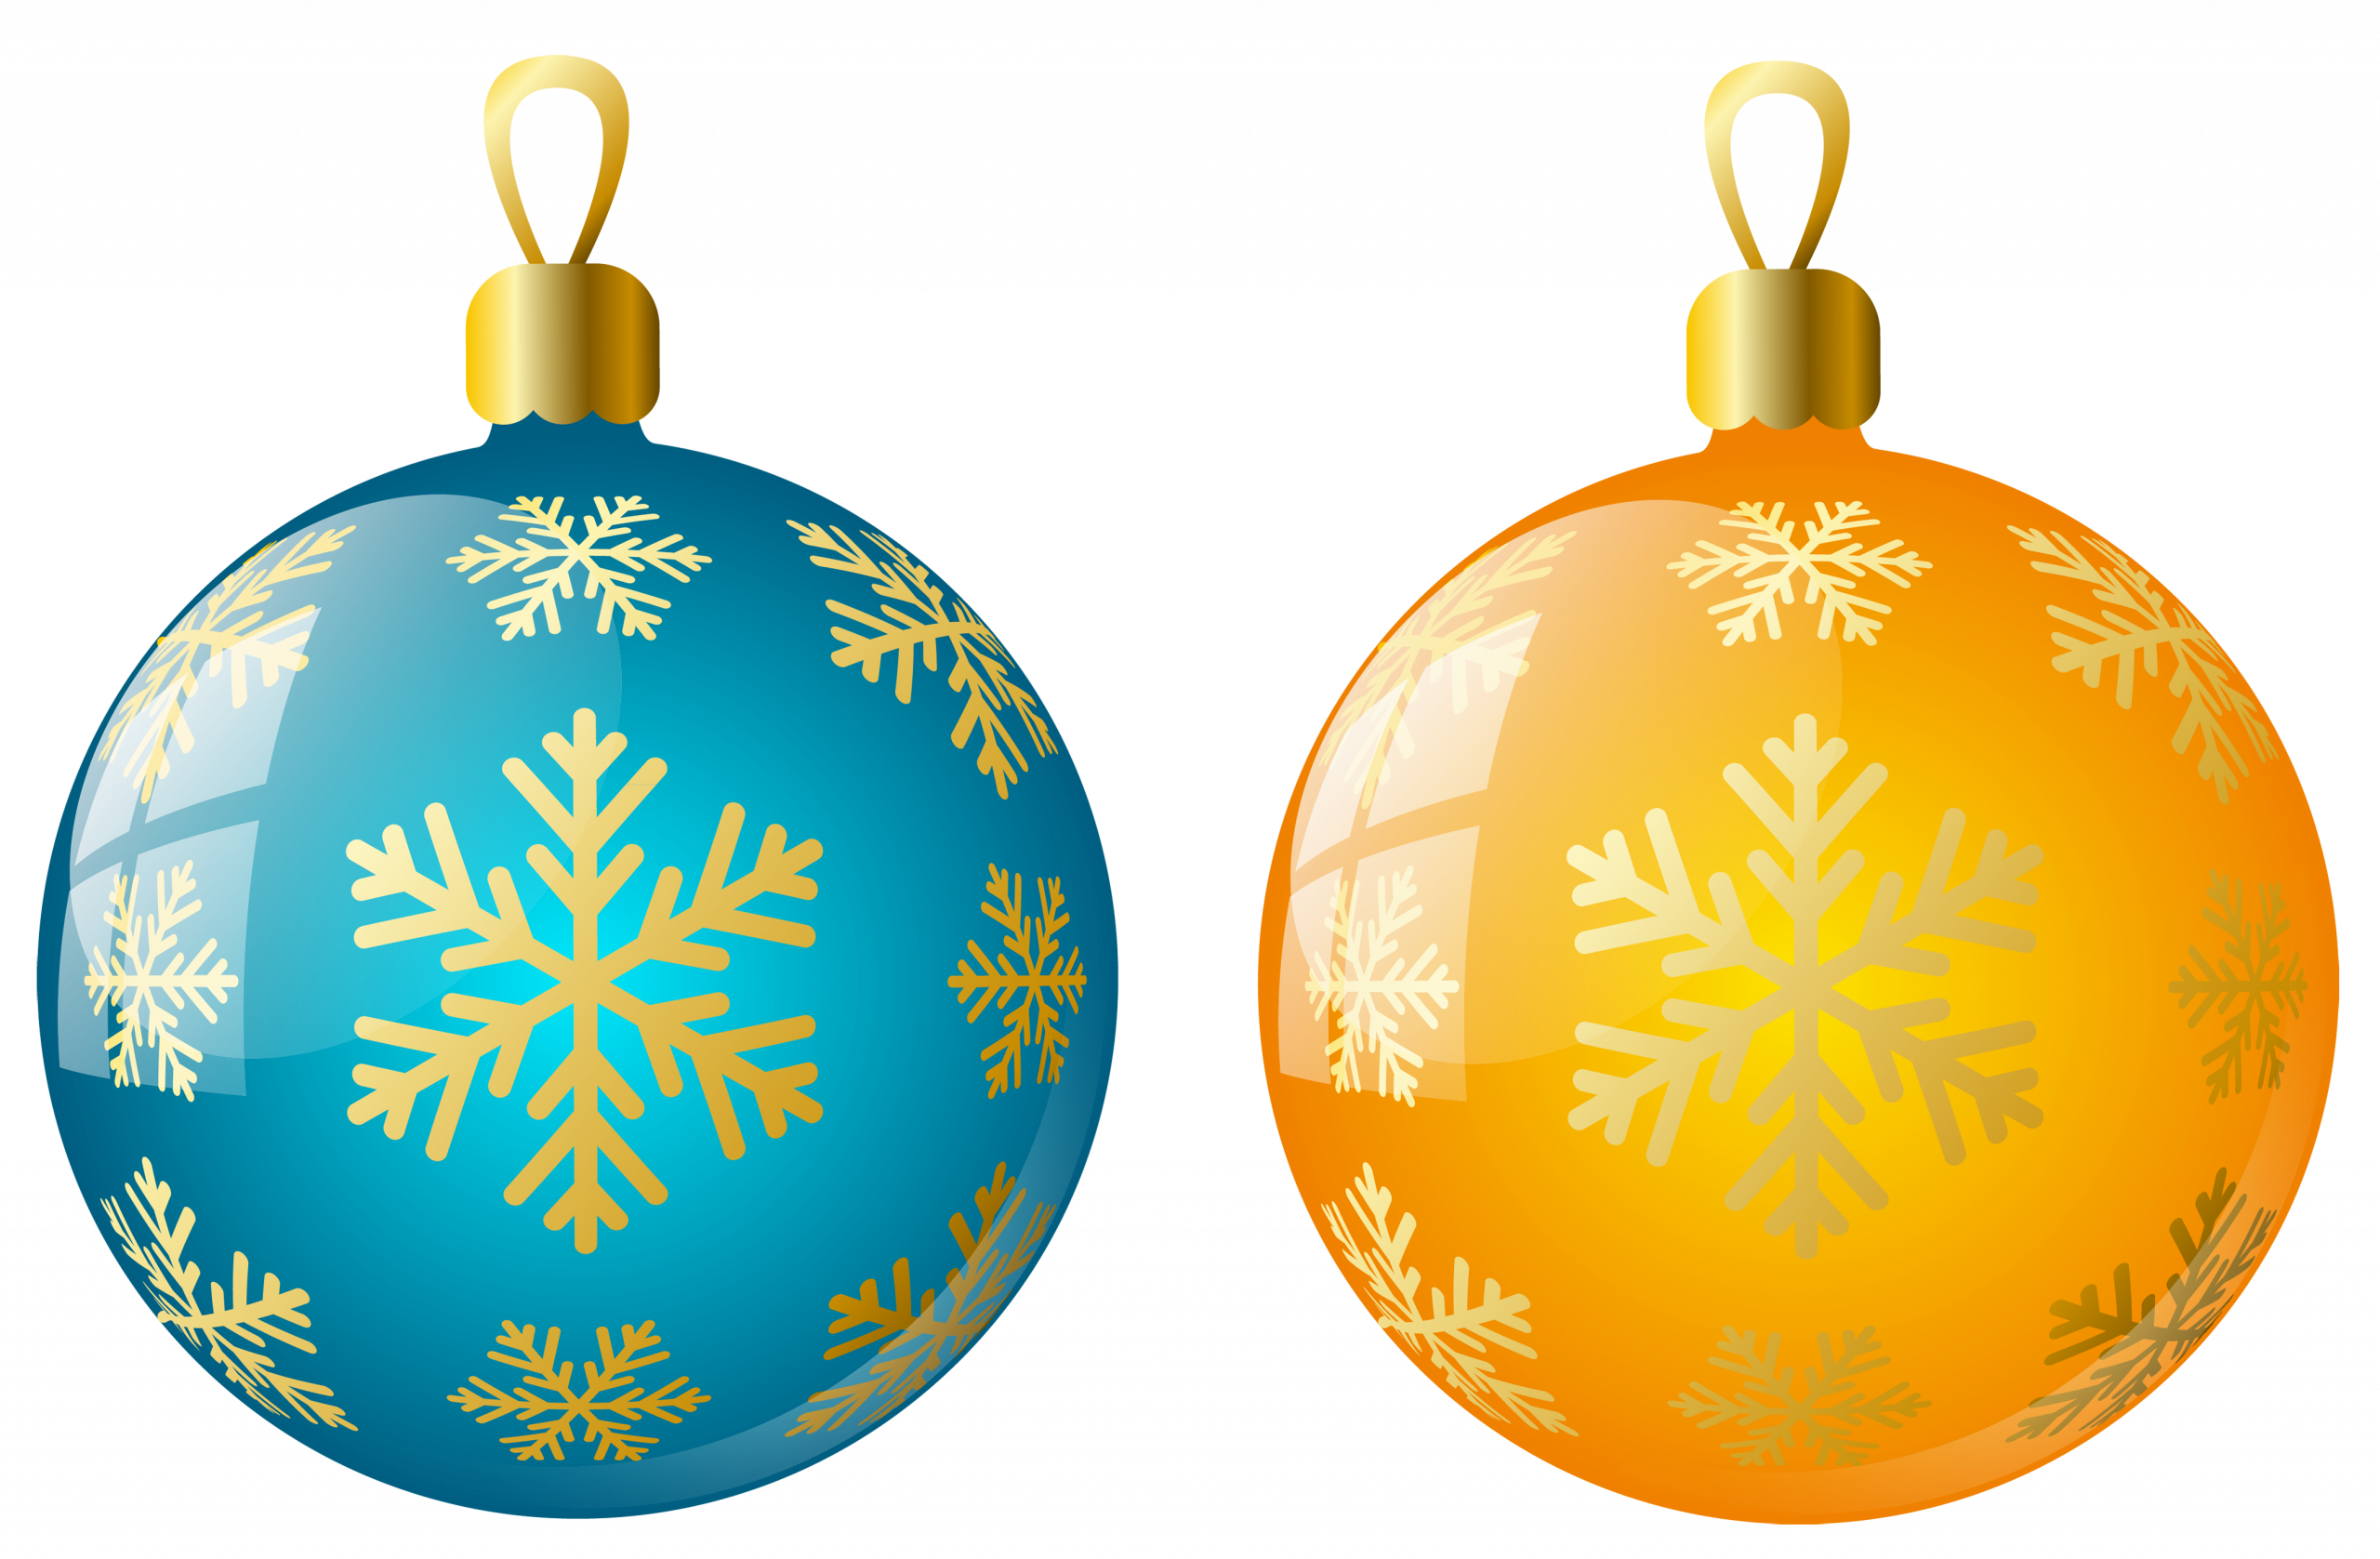 A Pair Of Ornaments With Snowflakes On Them